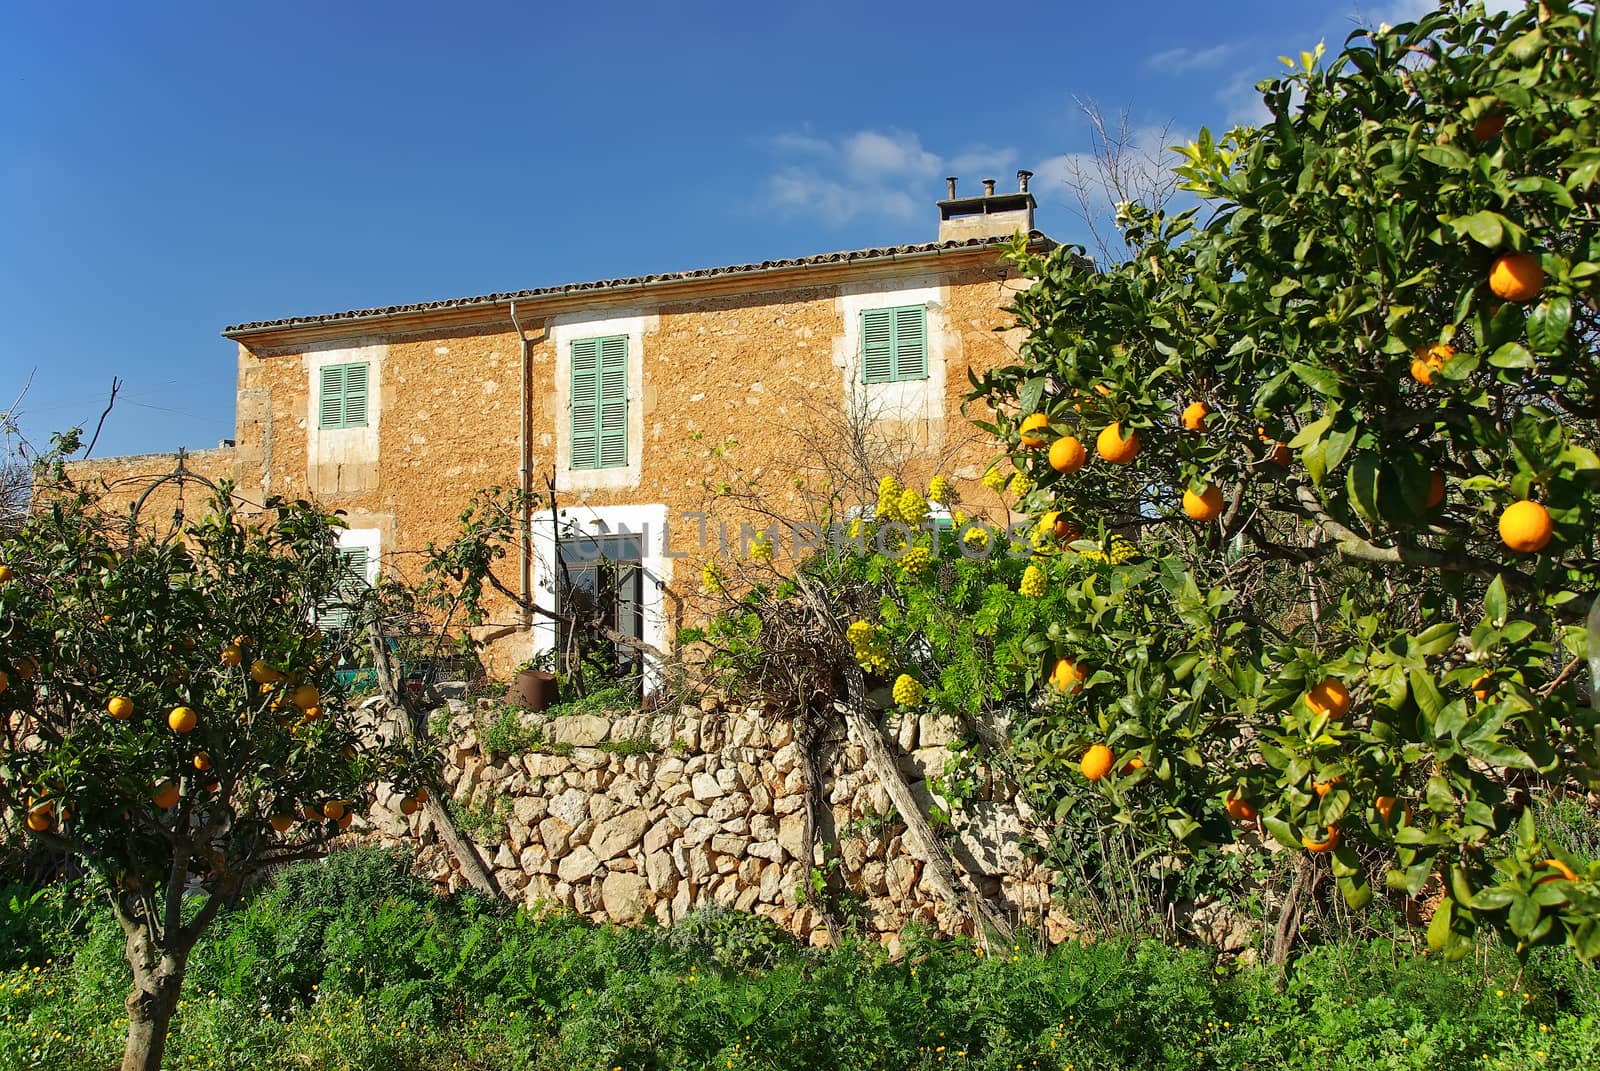 Typical Country House in Majorca (Balearic Islands - Spain)